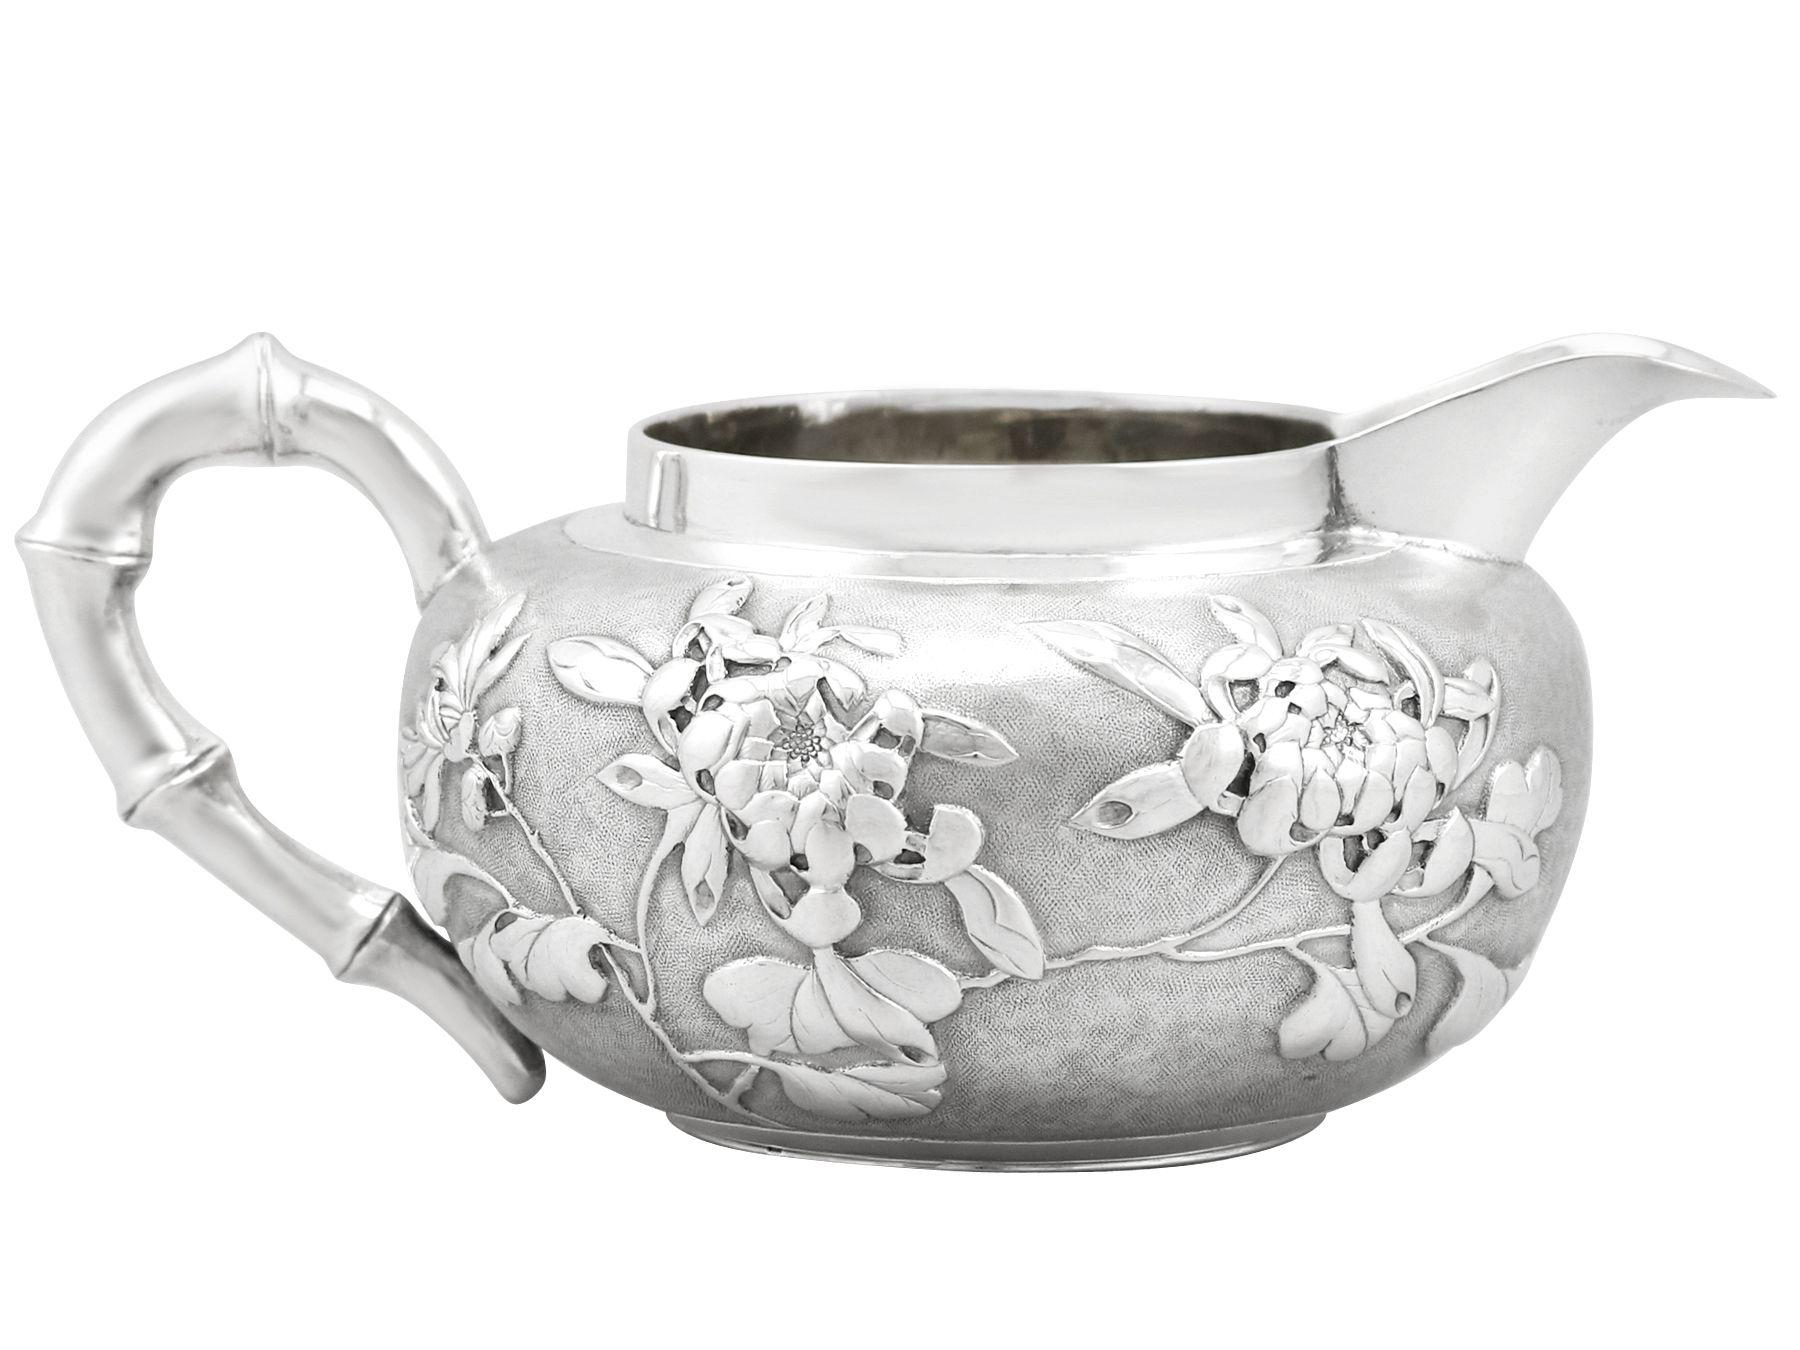 A fine and impressive antique Chinese export silver cream jug, an addition to our Asian silver teaware collection

This impressive antique Chinese export silver cream jug has a circular rounded form.

The surface of this antique cream jug is